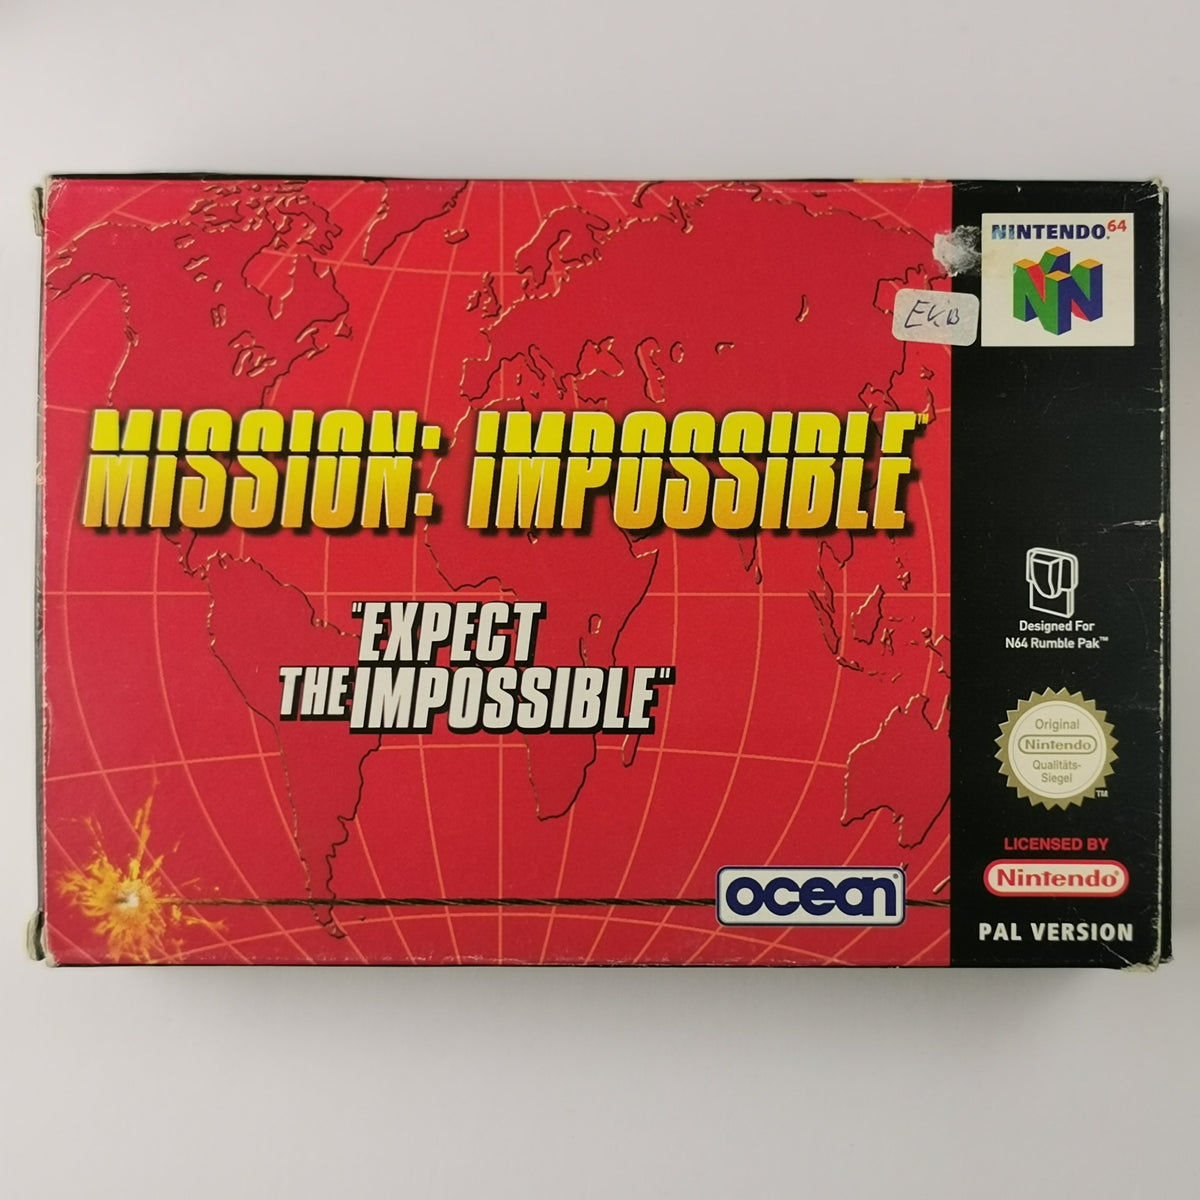 Mission Impossible Nintendo 64 [N64]